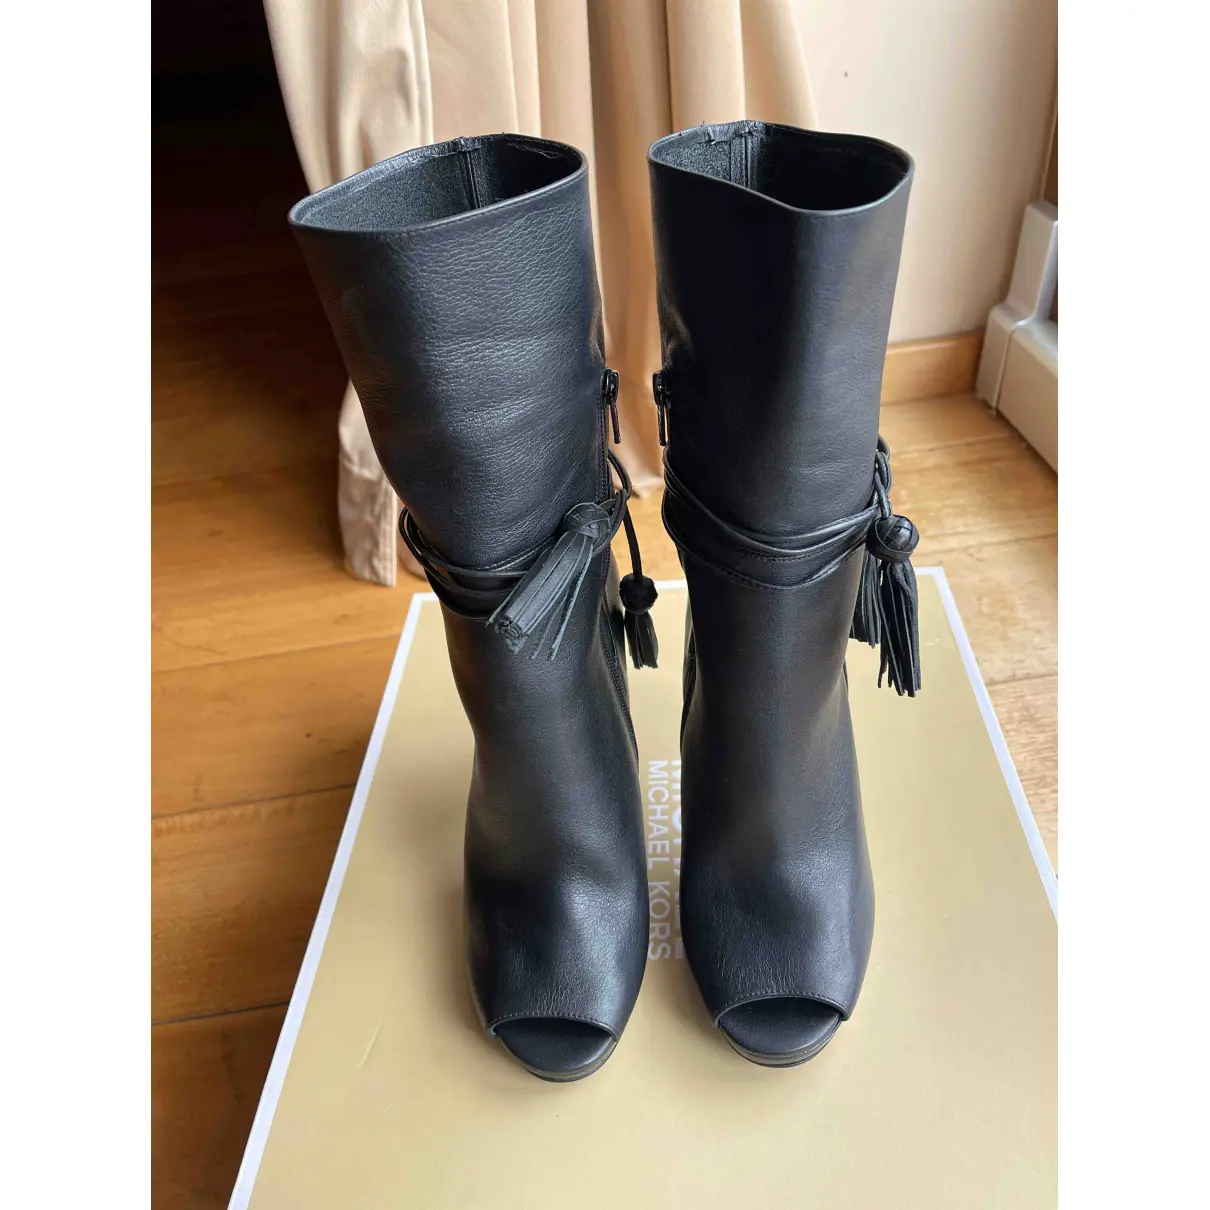 Buy Michael Kors Leather ankle boots online